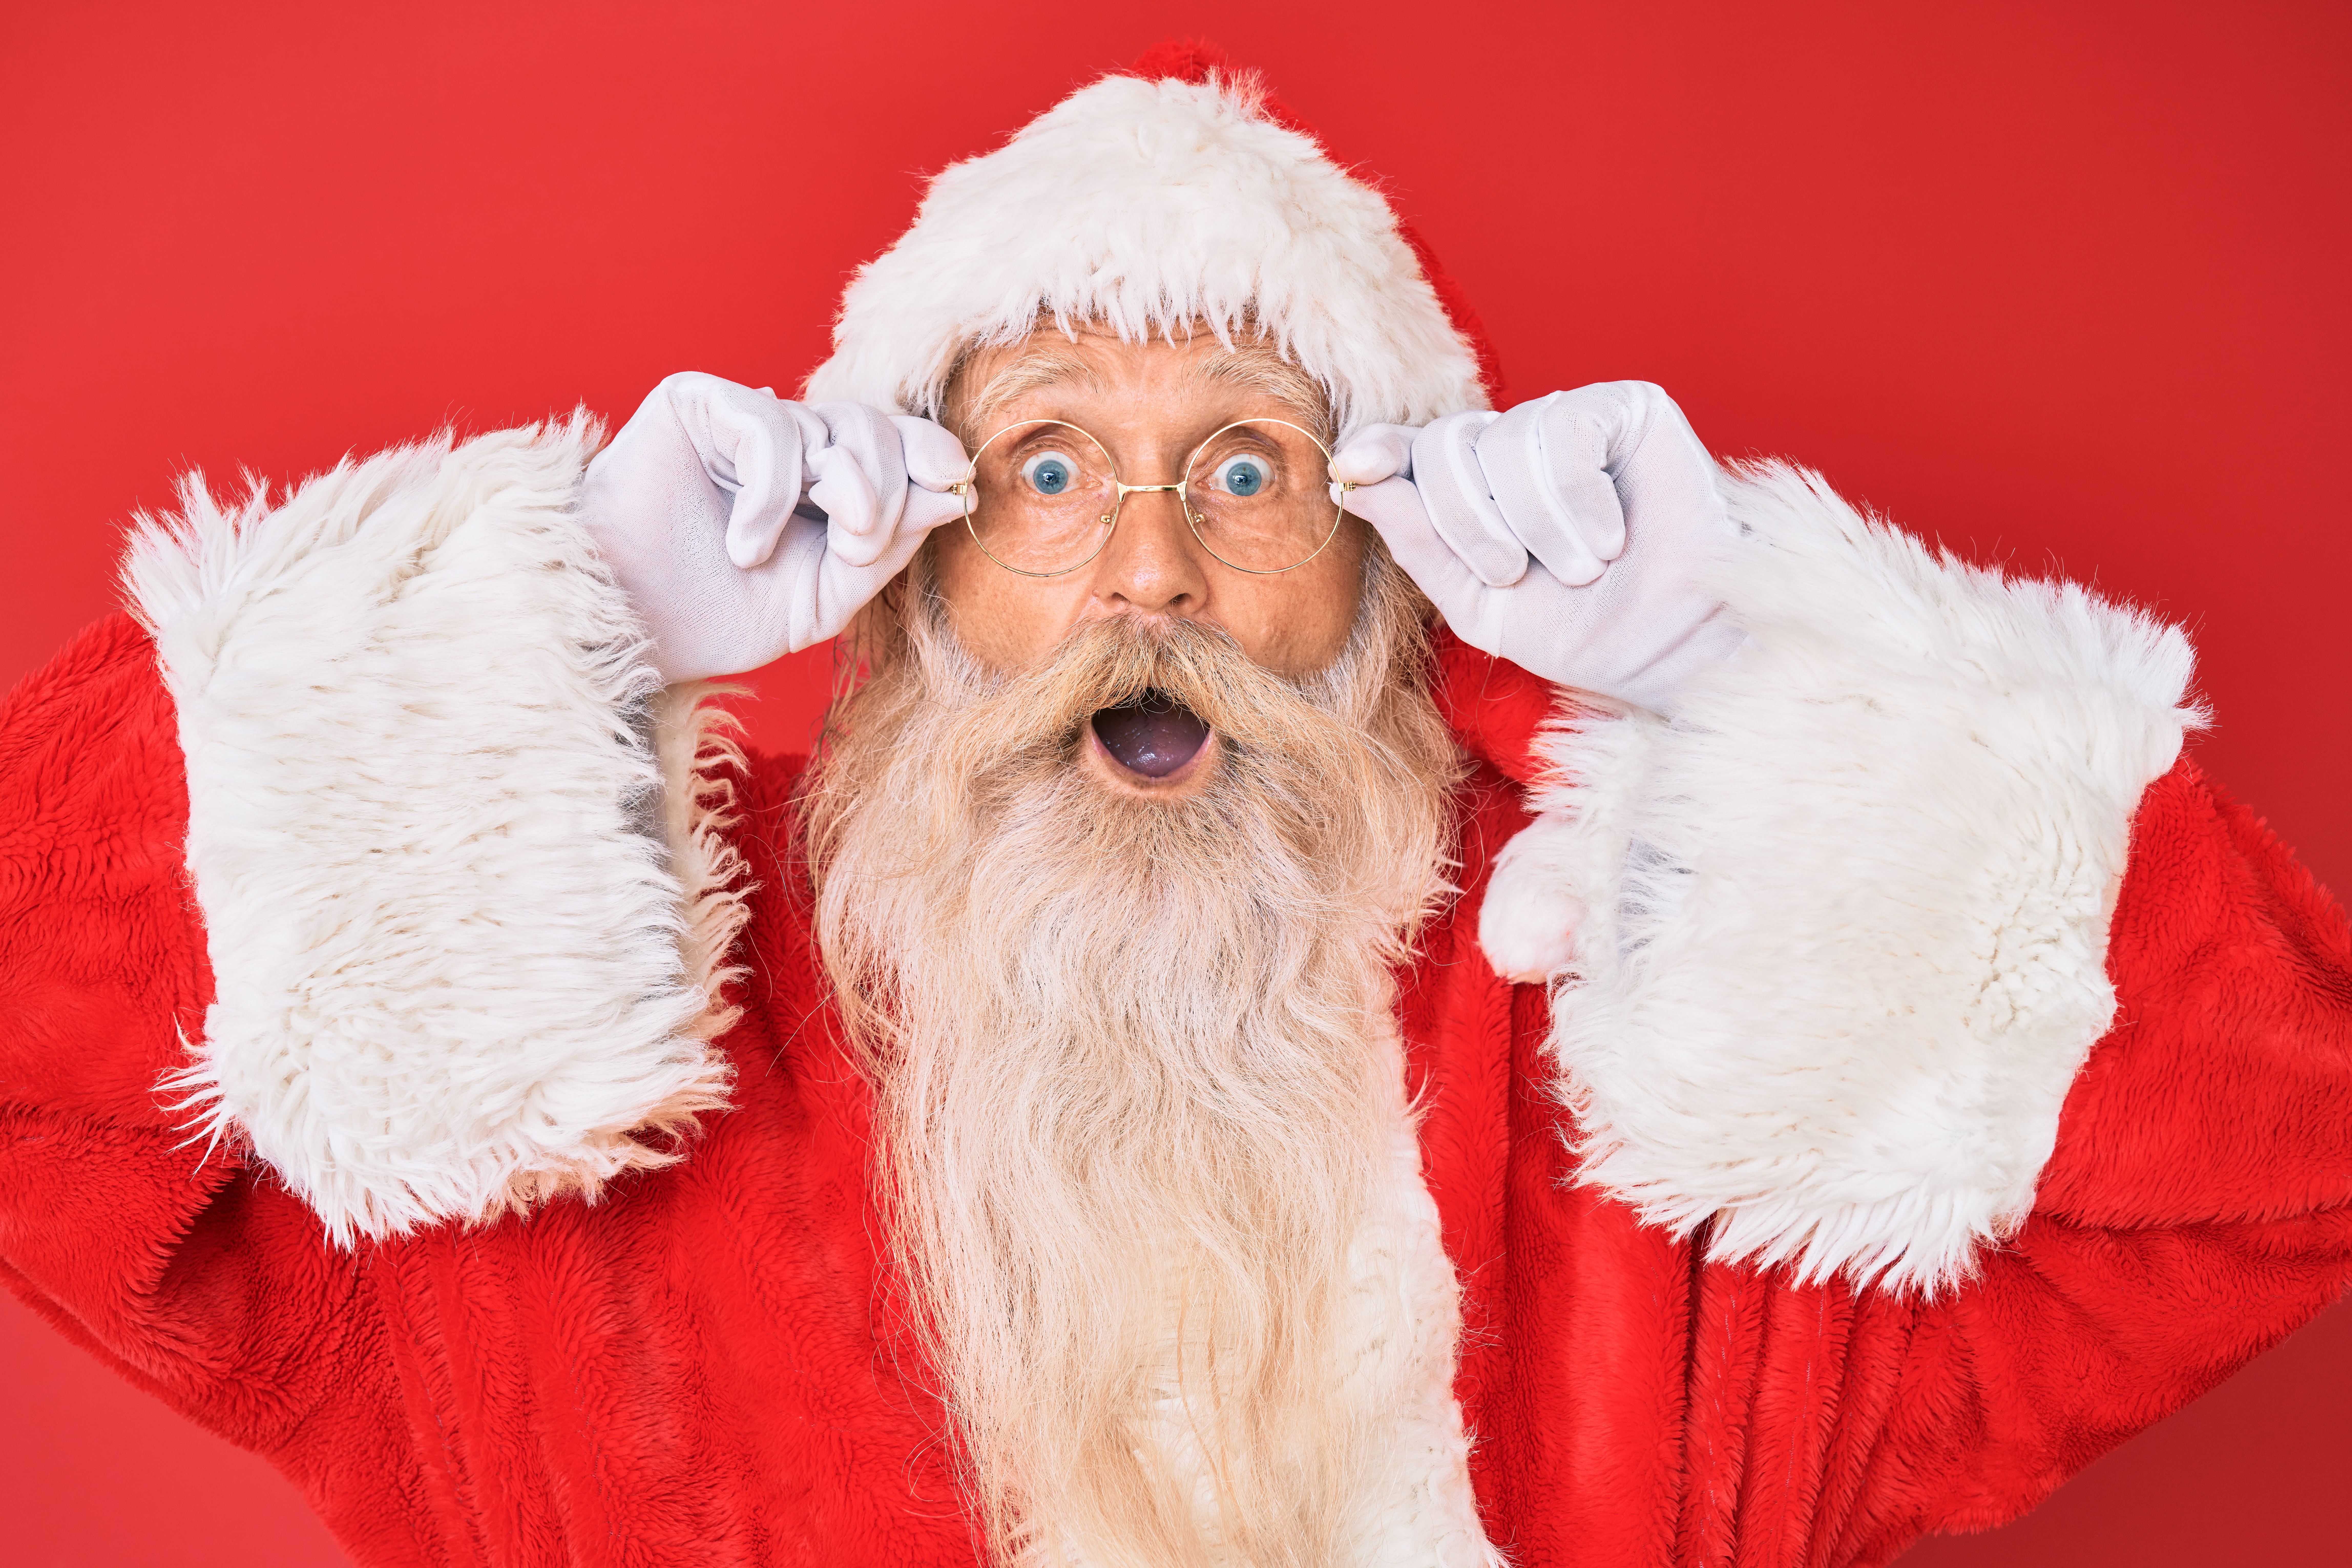 A father Christmas with an expression of surprise